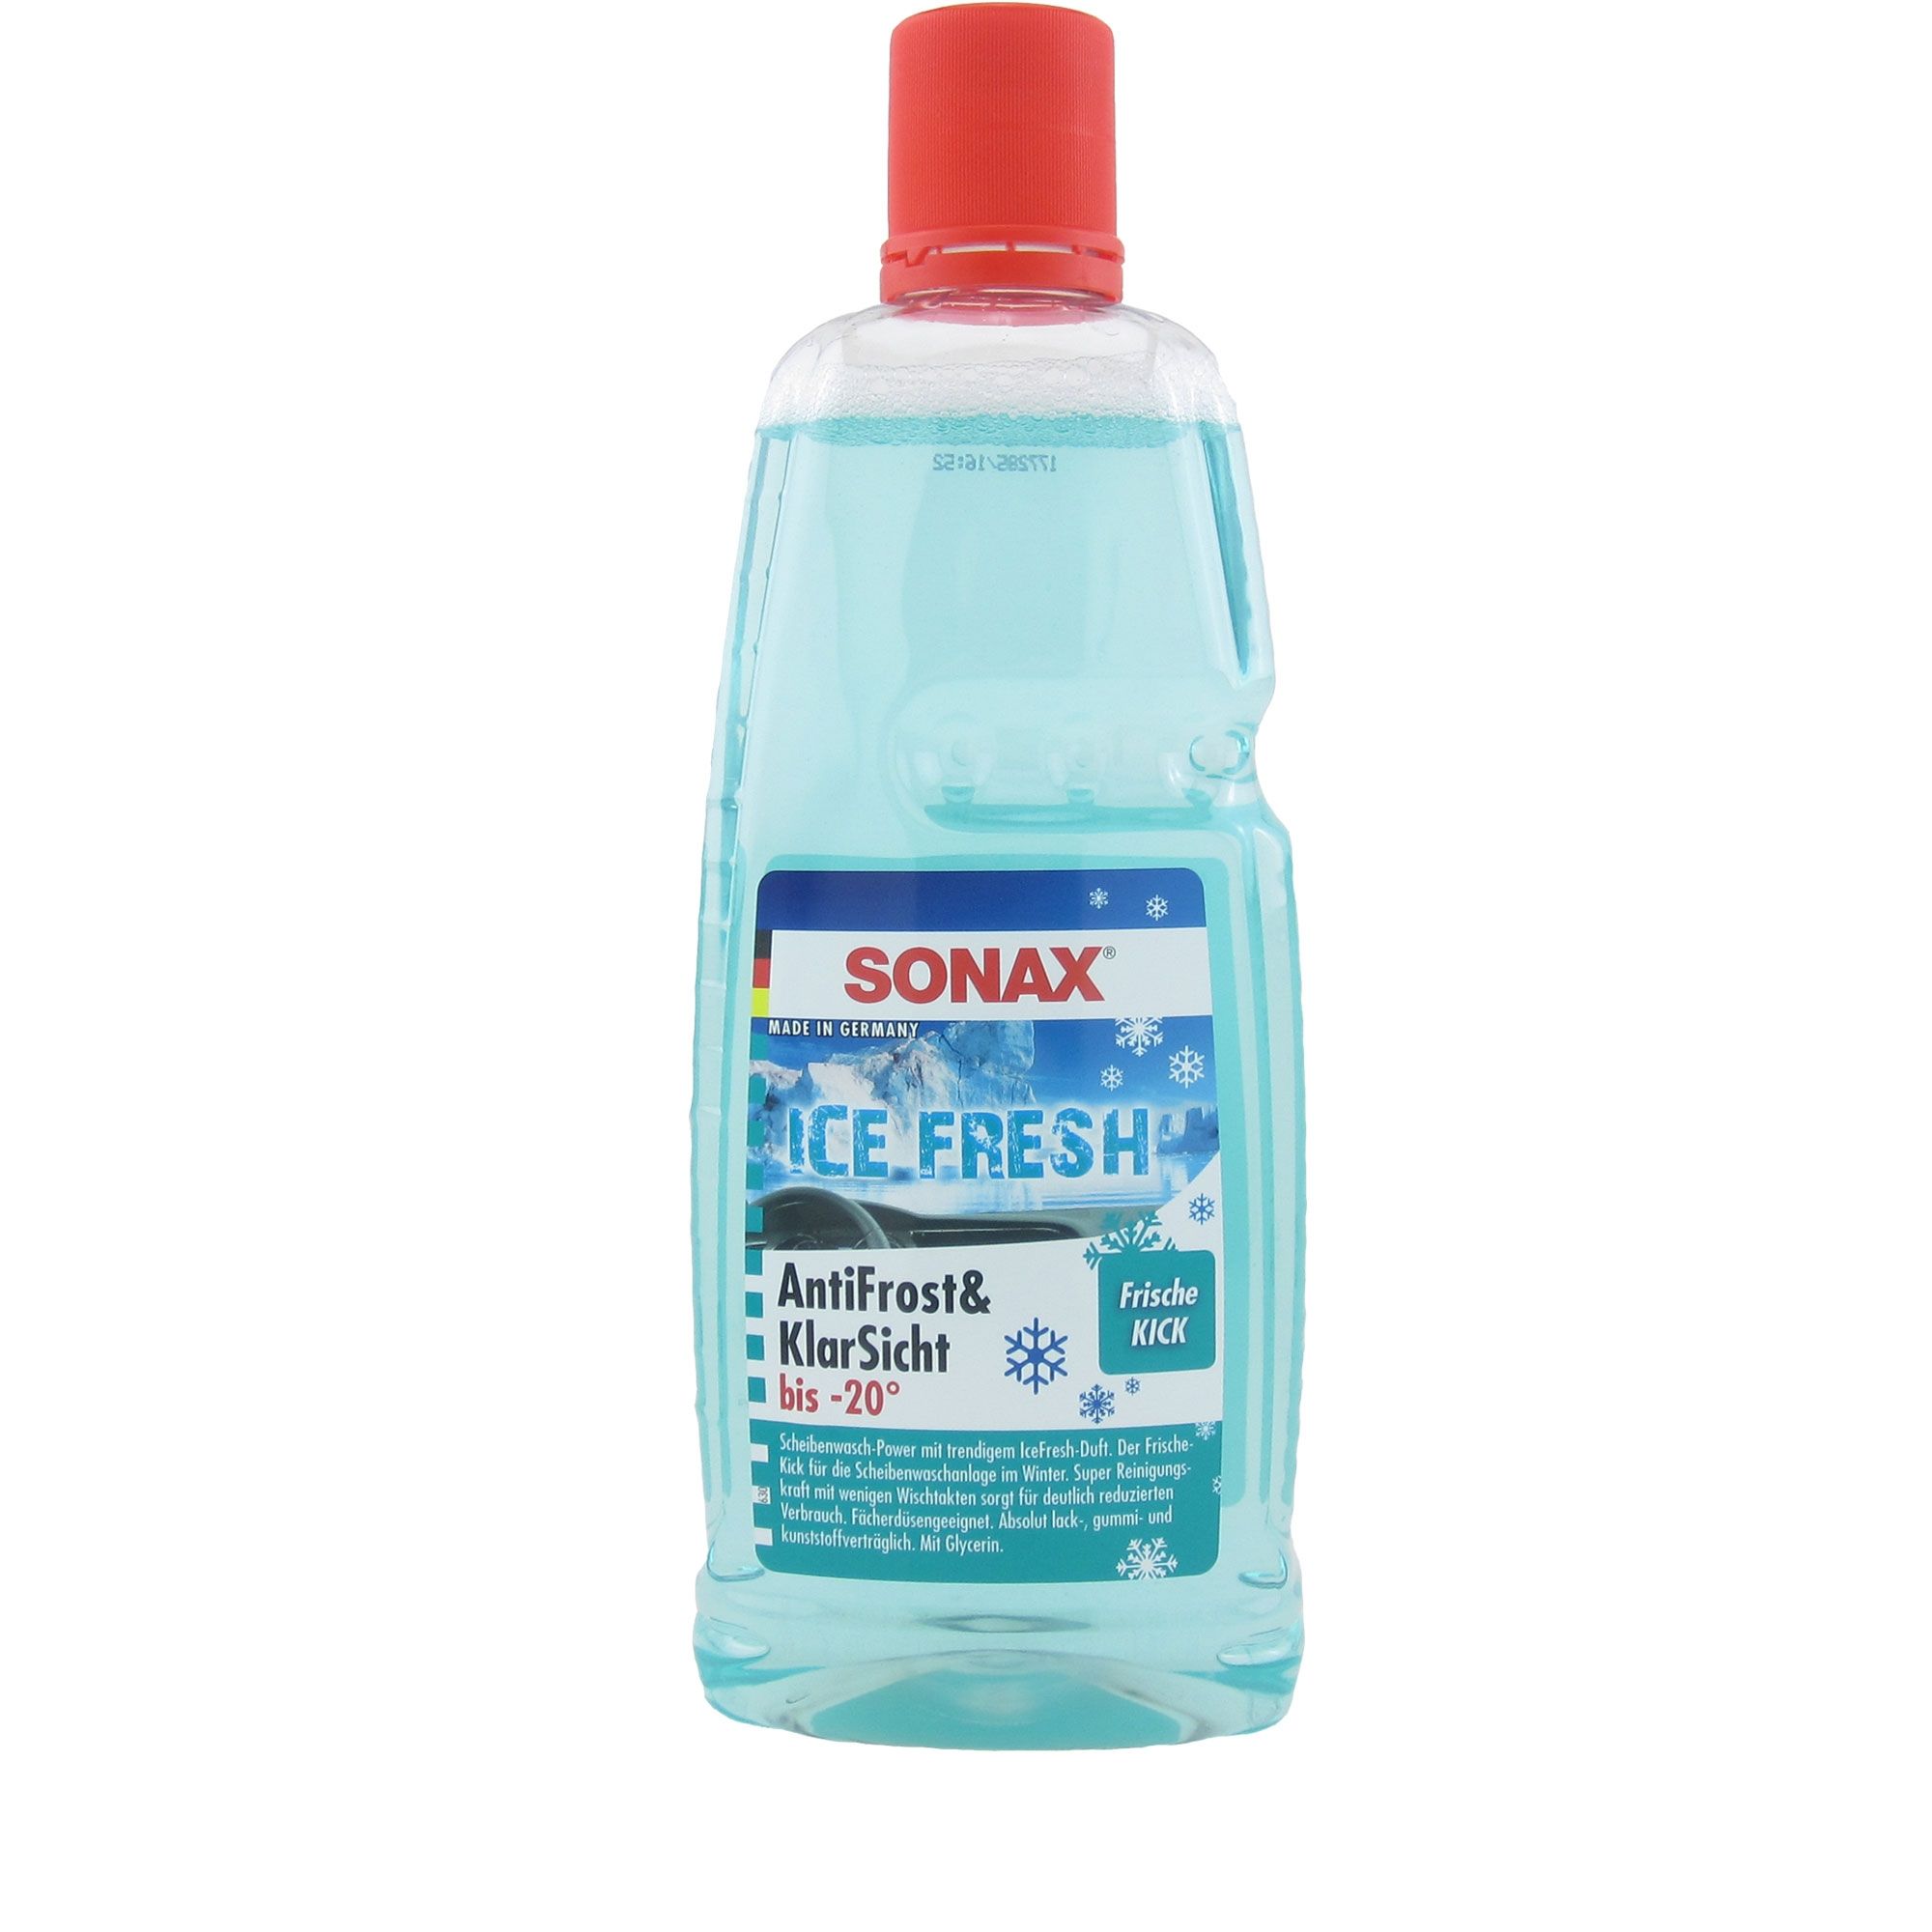 Sonax AntiFrost&KlarSicht Ice Fresh ready-to-use up to -20°C 1 L